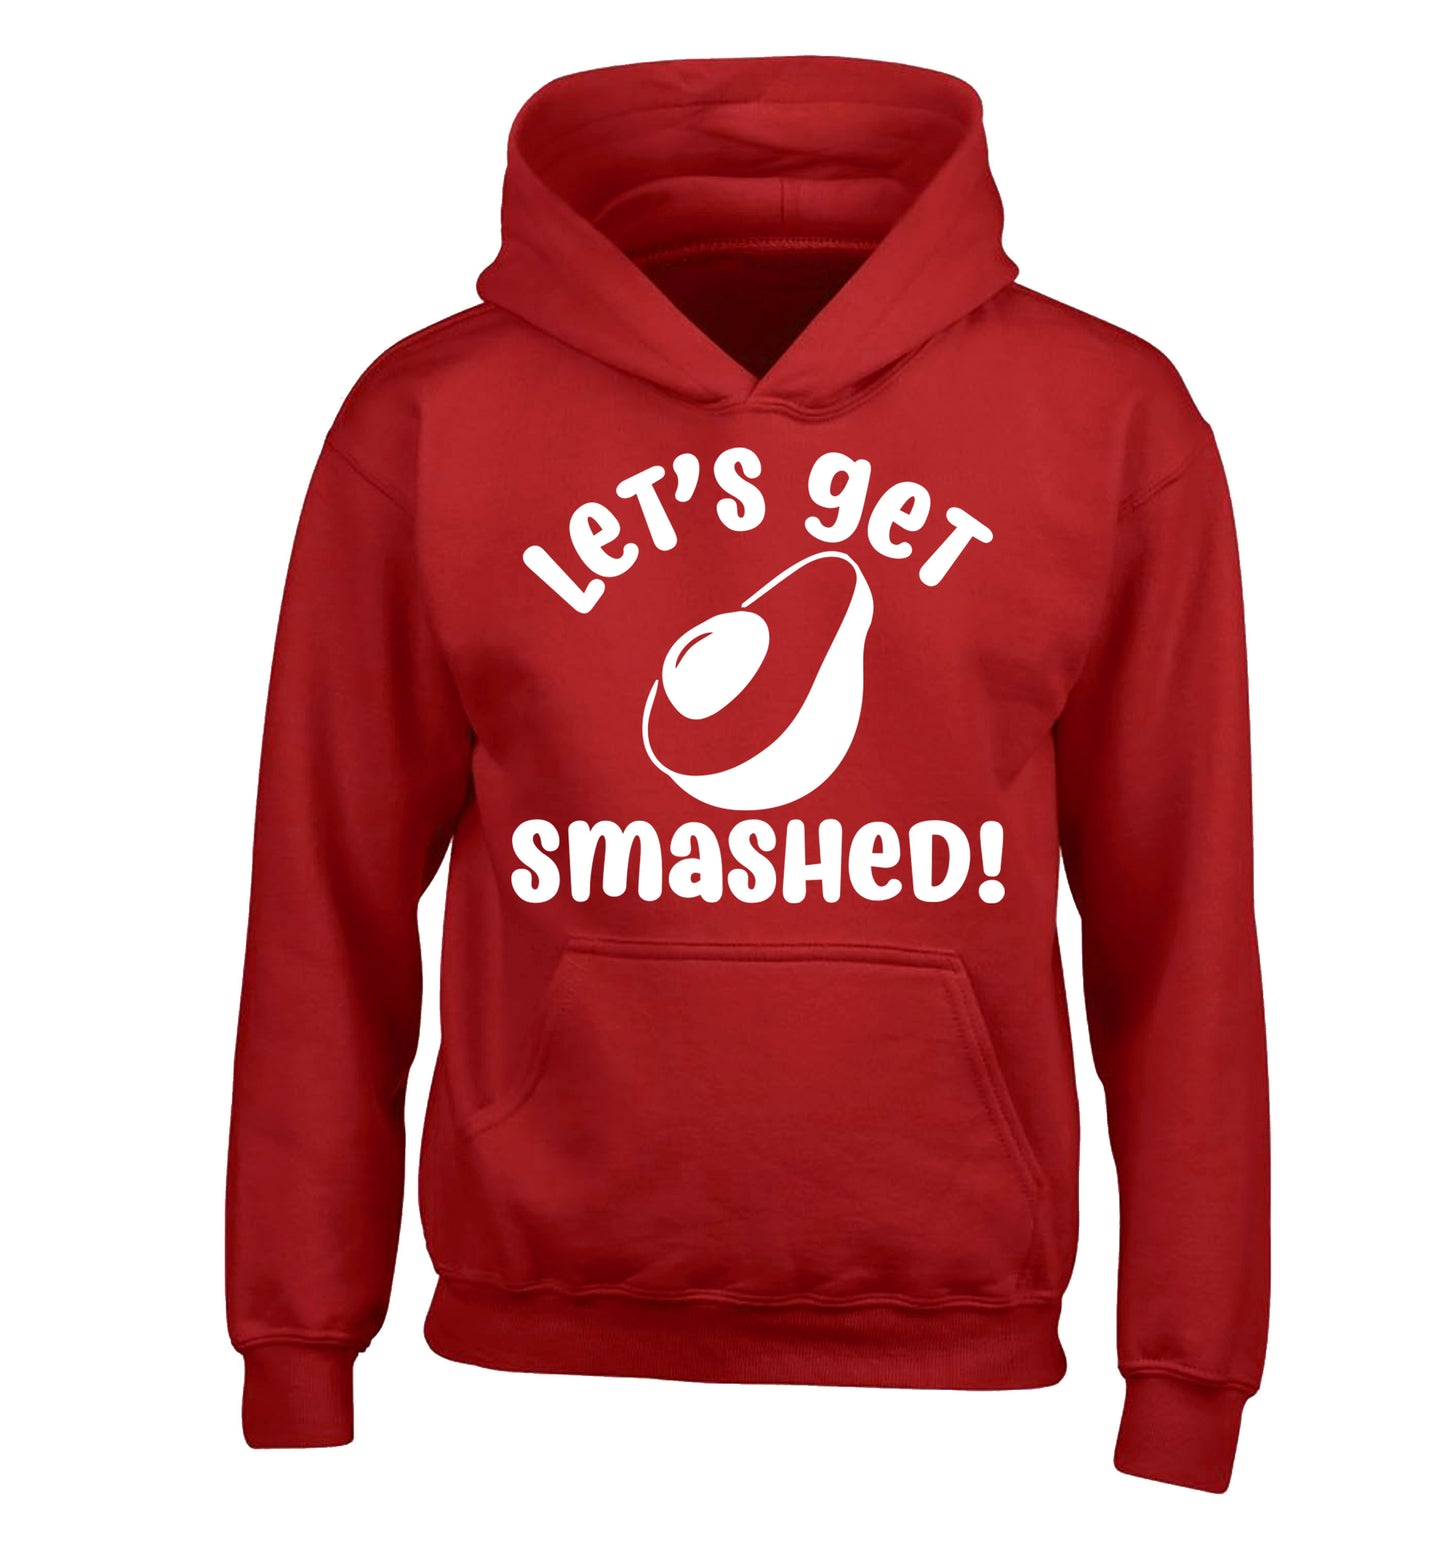 Let's get smashed children's red hoodie 12-14 Years